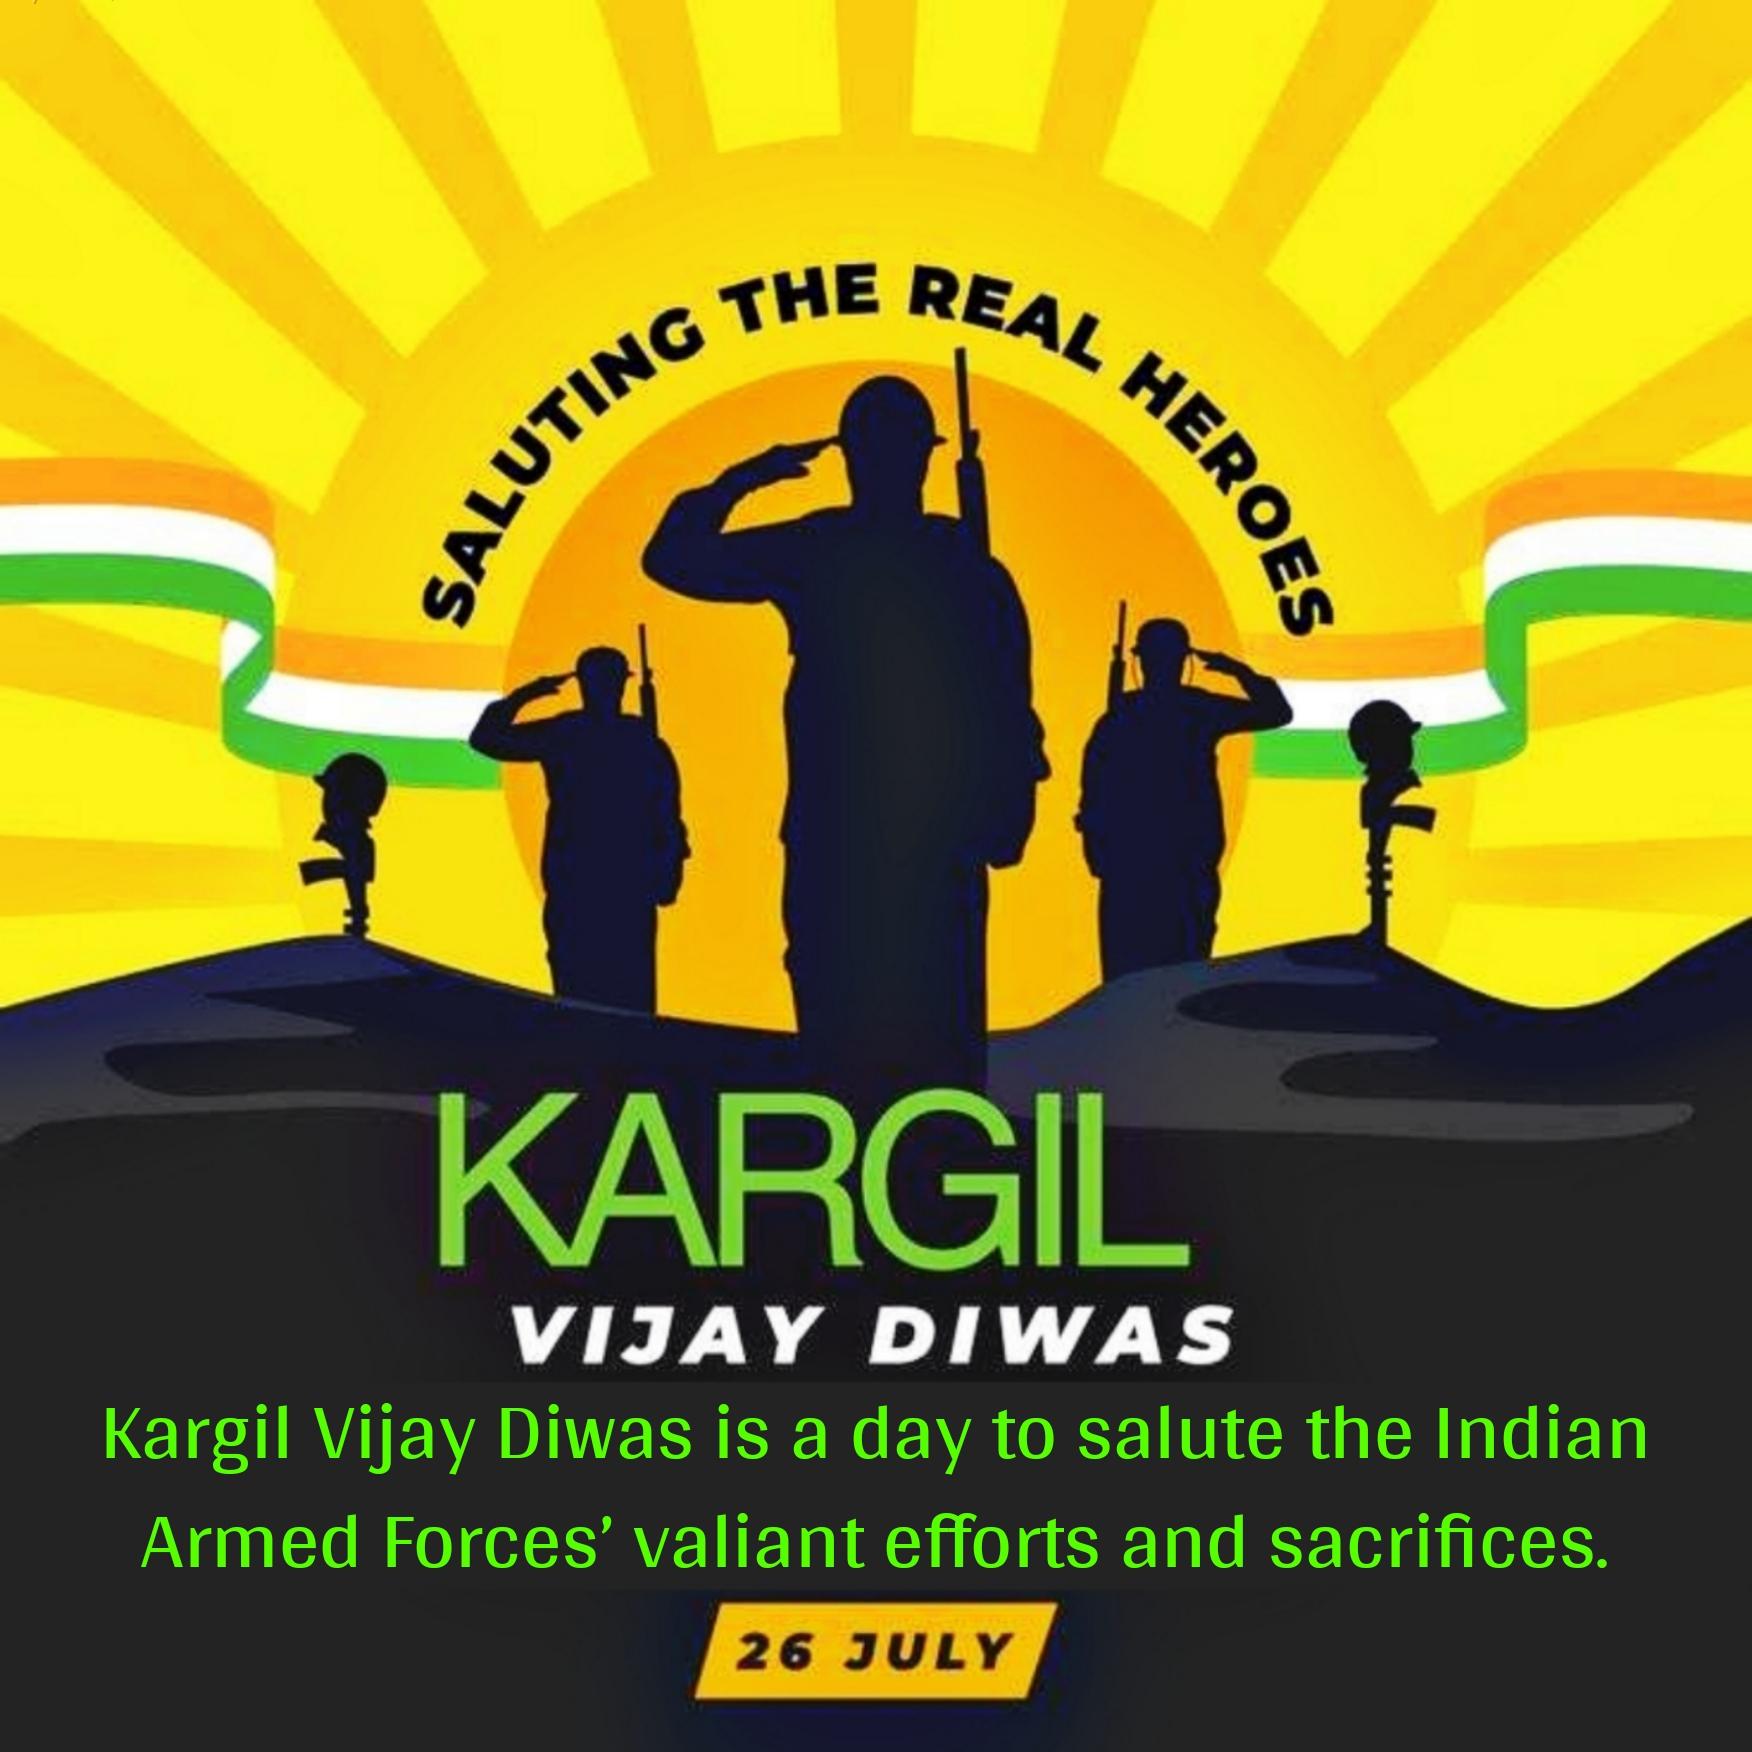 Kargil Vijay Diwas is a day to salute the Indian Armed Forces